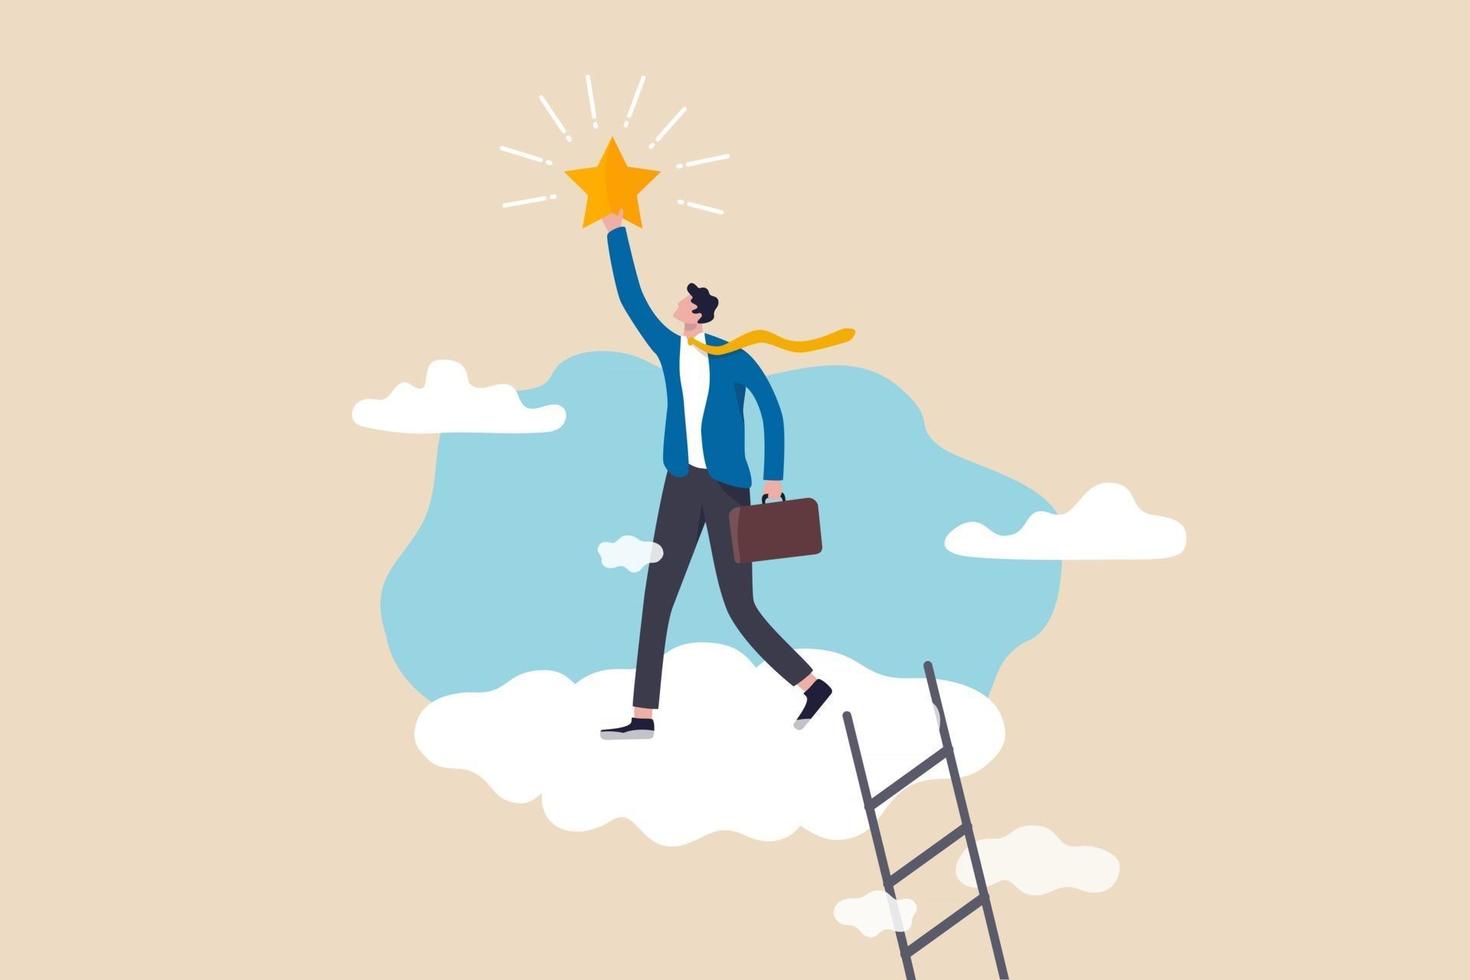 Business champion succeed to get reward, winning star employee, career path or dream job concept, success businessman climb up ladder up into the cloud to reaching and grab precious star. vector